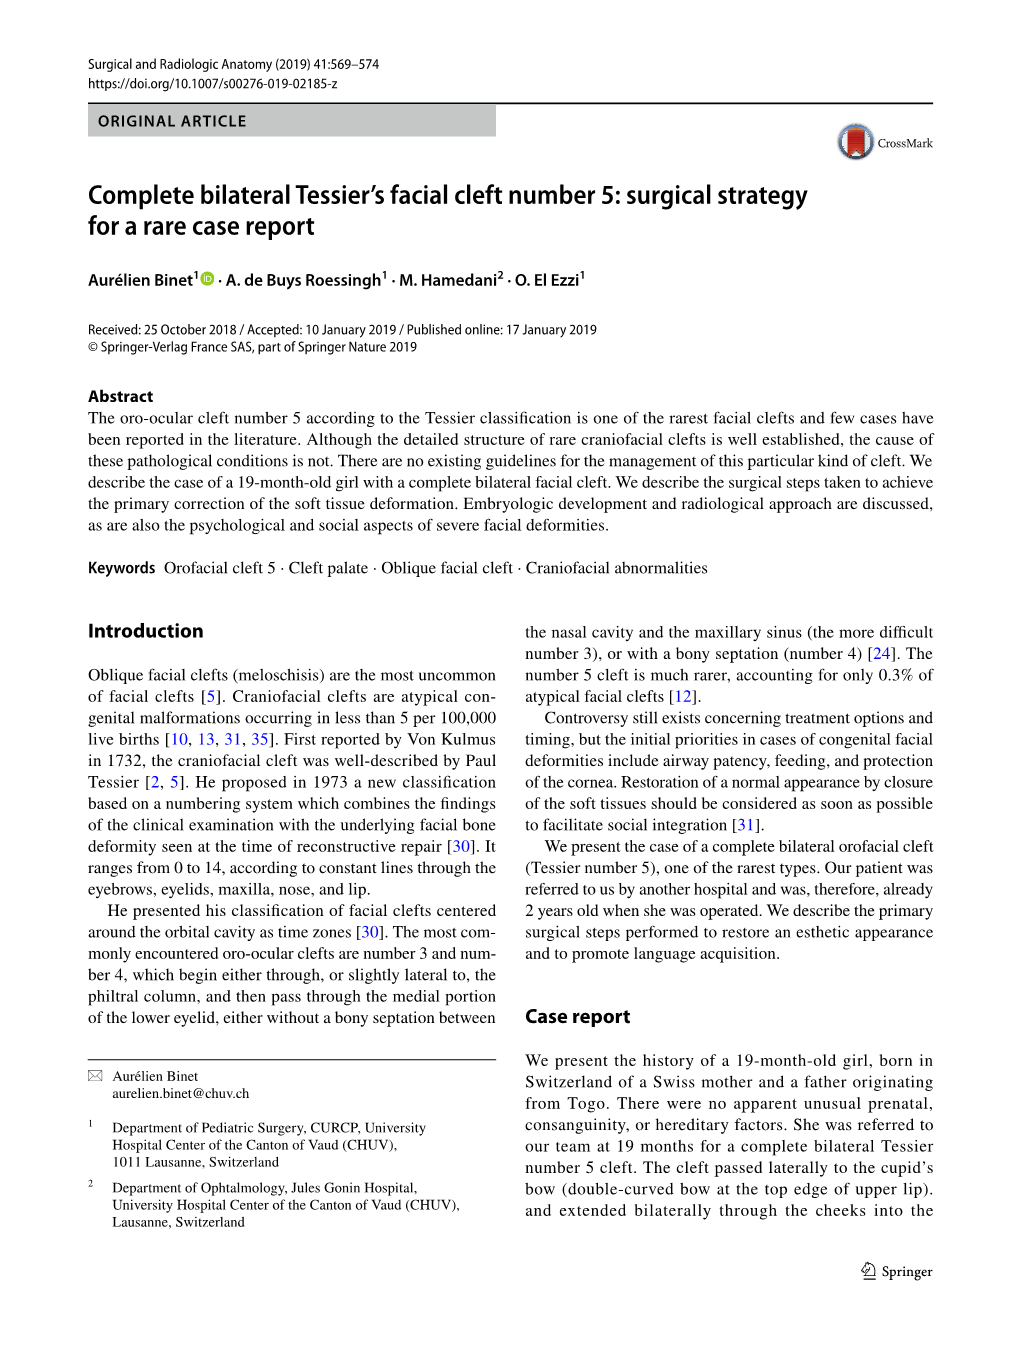 Complete Bilateral Tessier's Facial Cleft Number 5: Surgical Strategy for A